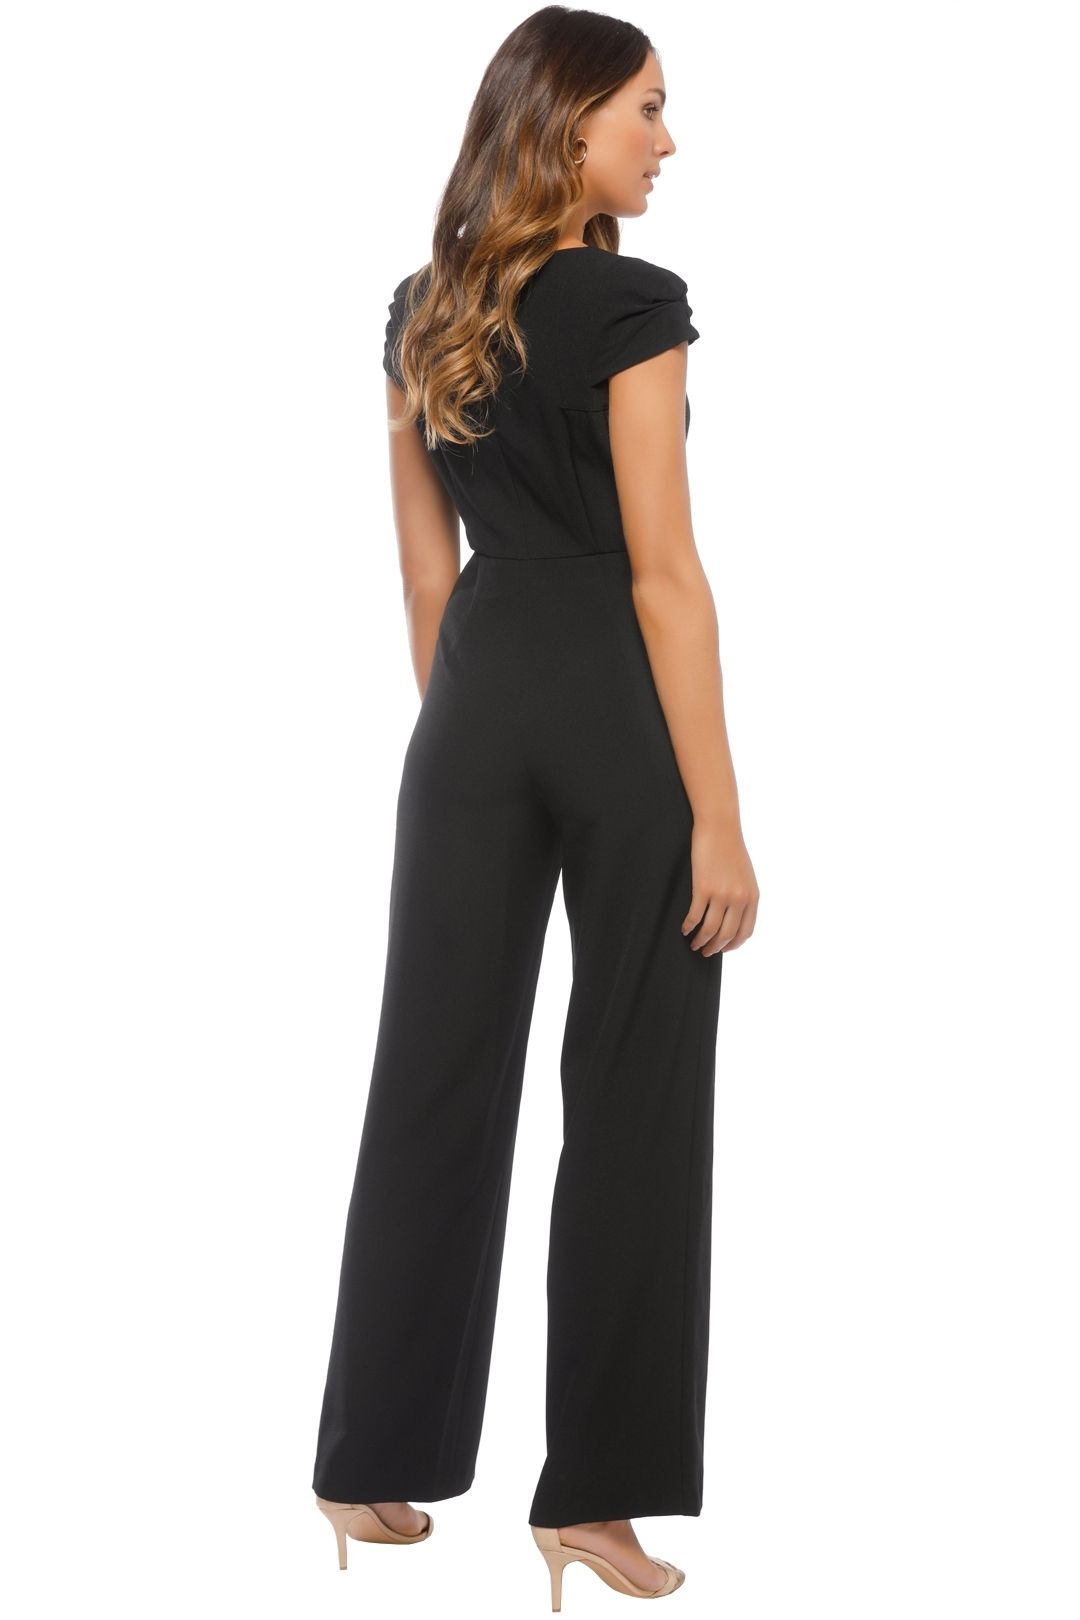 Adrianna Papell - Stretch Crepe Jumpsuit - Black - Back